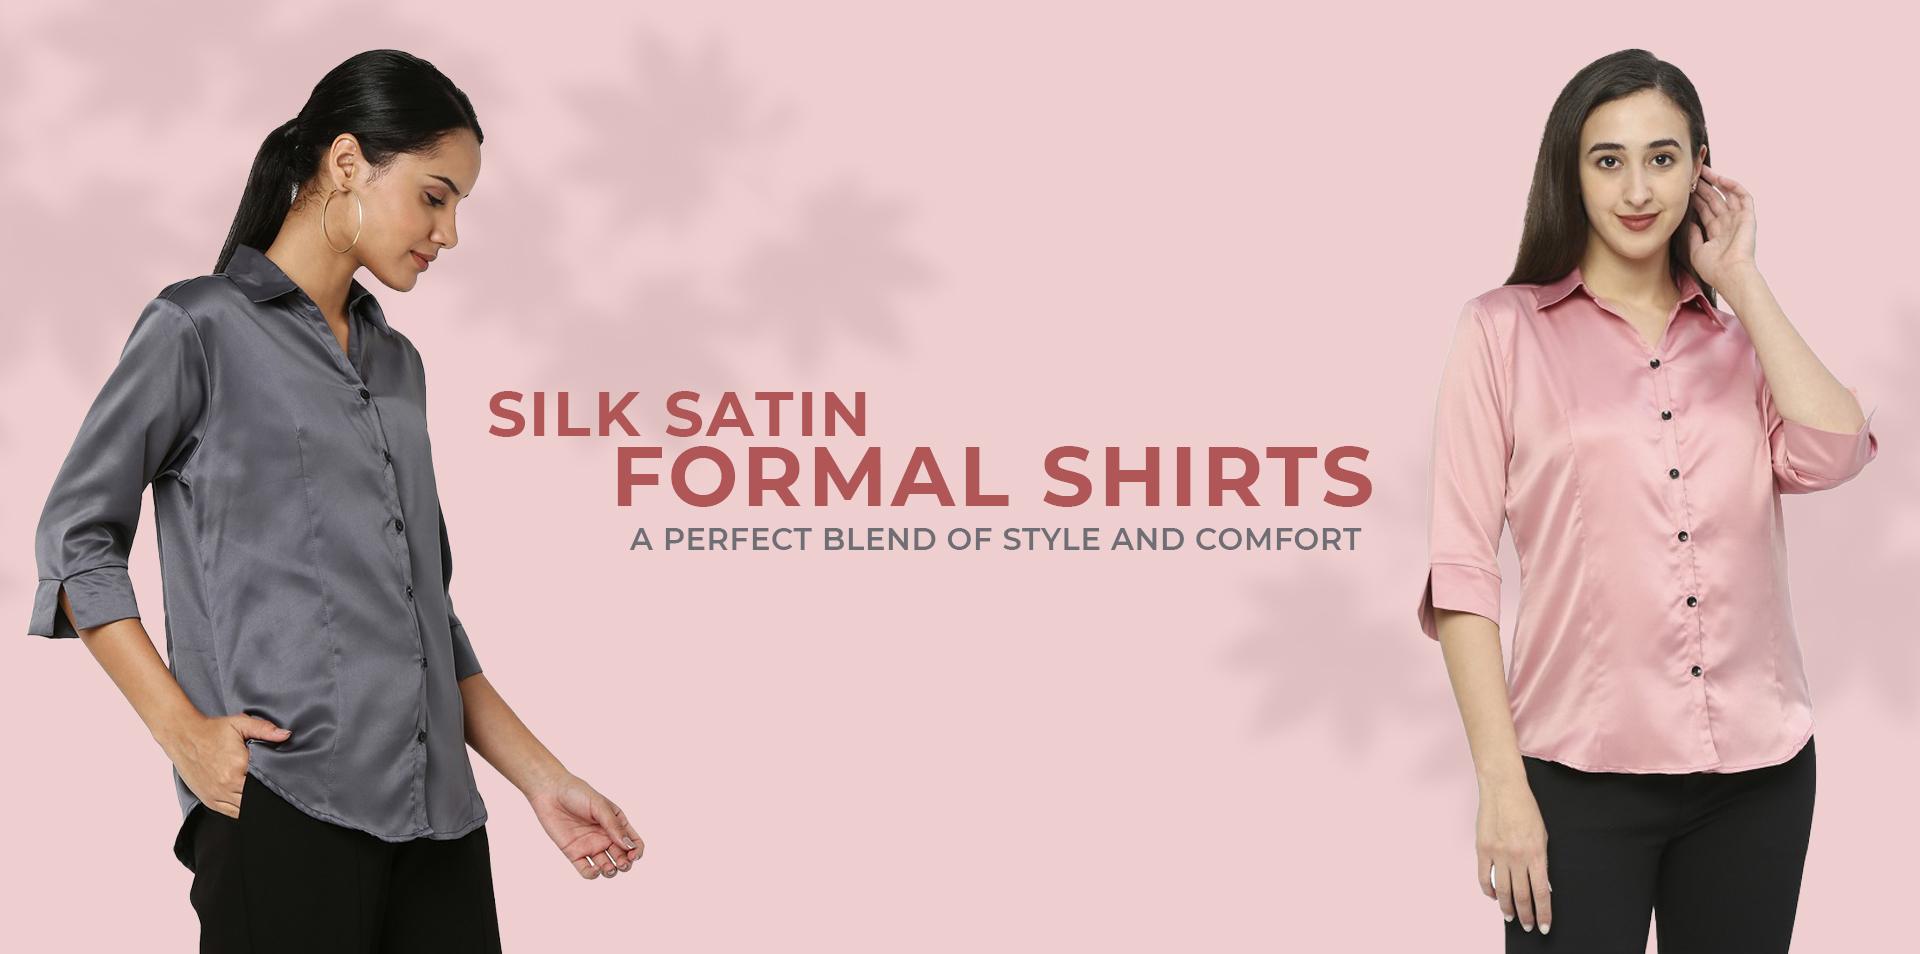 5 Timeless Silk Satin Formal Shirts Designs for Stylish Women by Smarty Pants